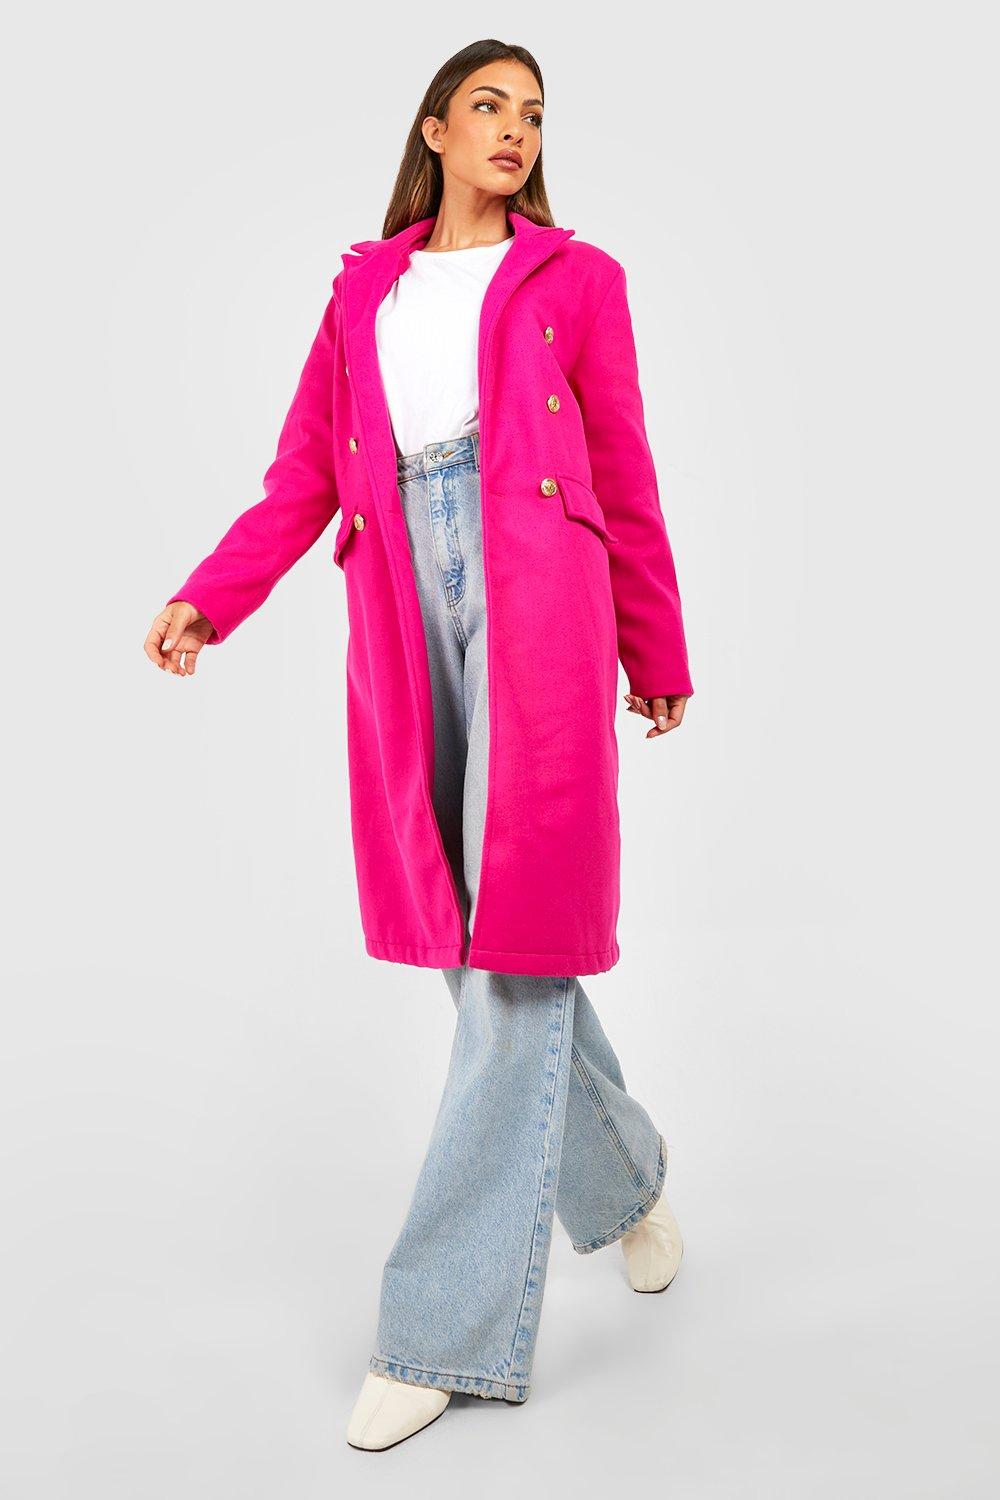 Womens Double Breasted Wool Look Coat - Pink - 8, Pink